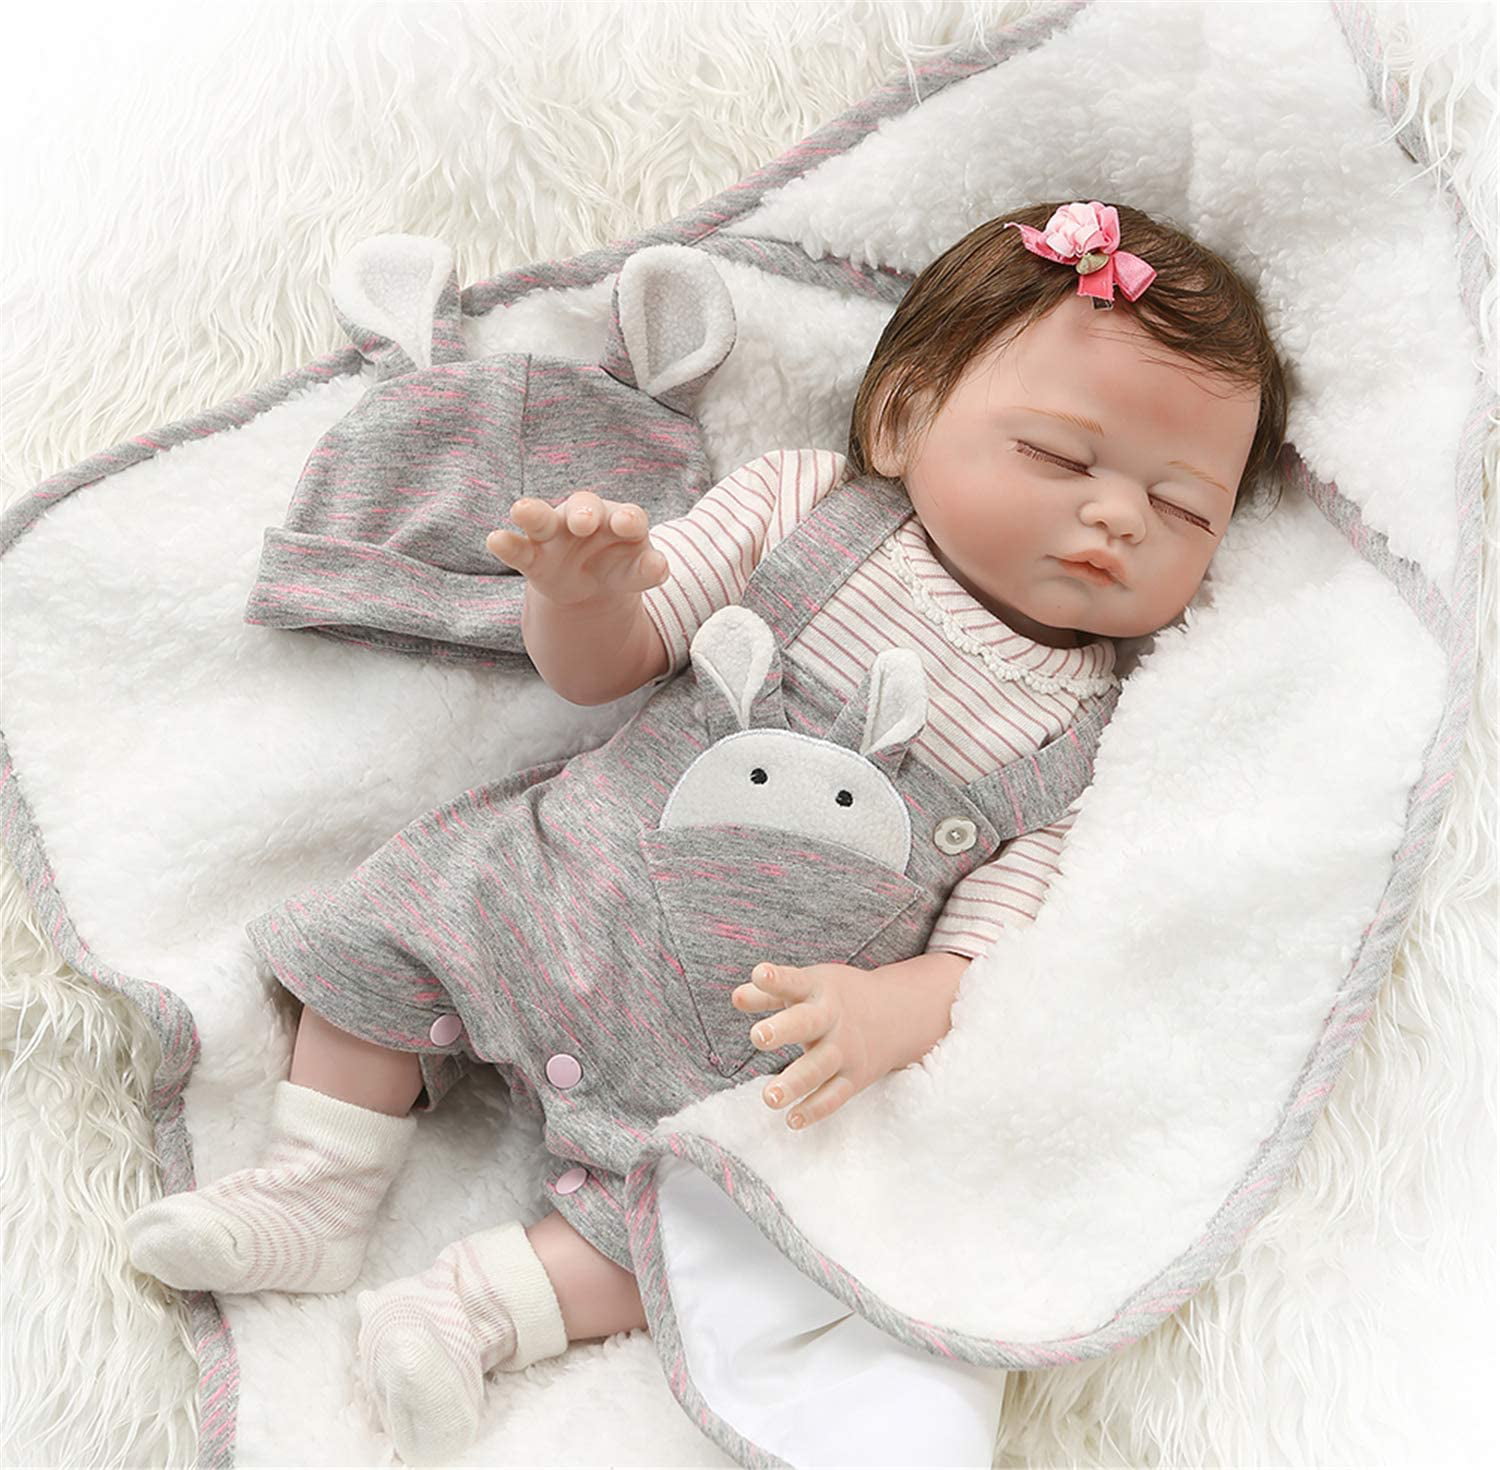 Pinky Bathable 18 Inch Reborn Baby Doll Girl Silicone Full Body Newborn Toddler 